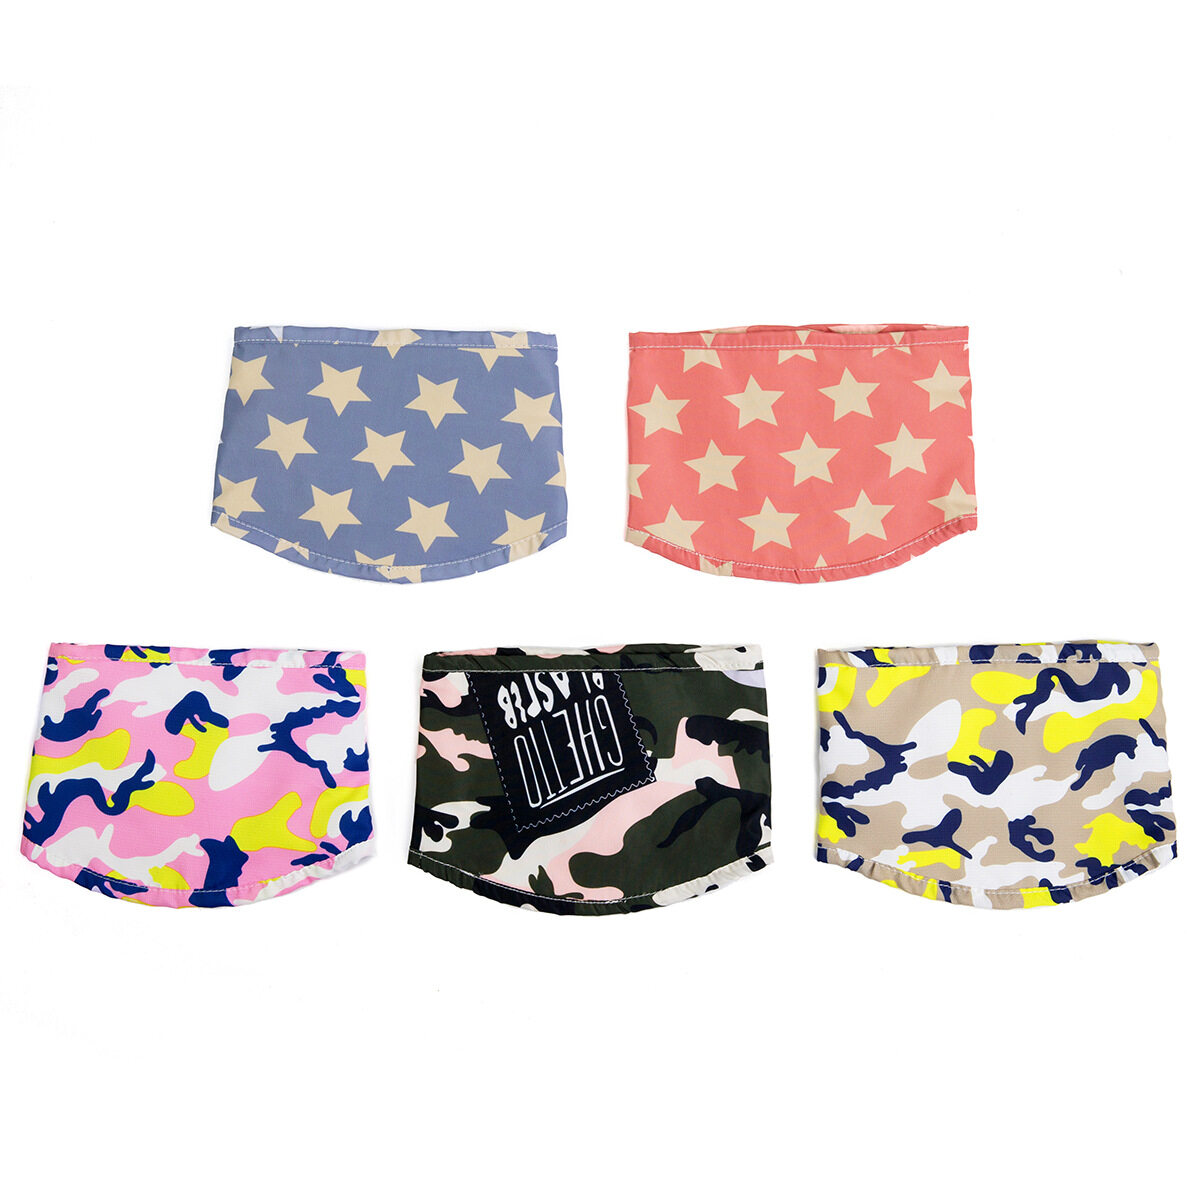 DY Loving Puppy Underpants Dogs Male Sanitary Shorts Washable Underwear